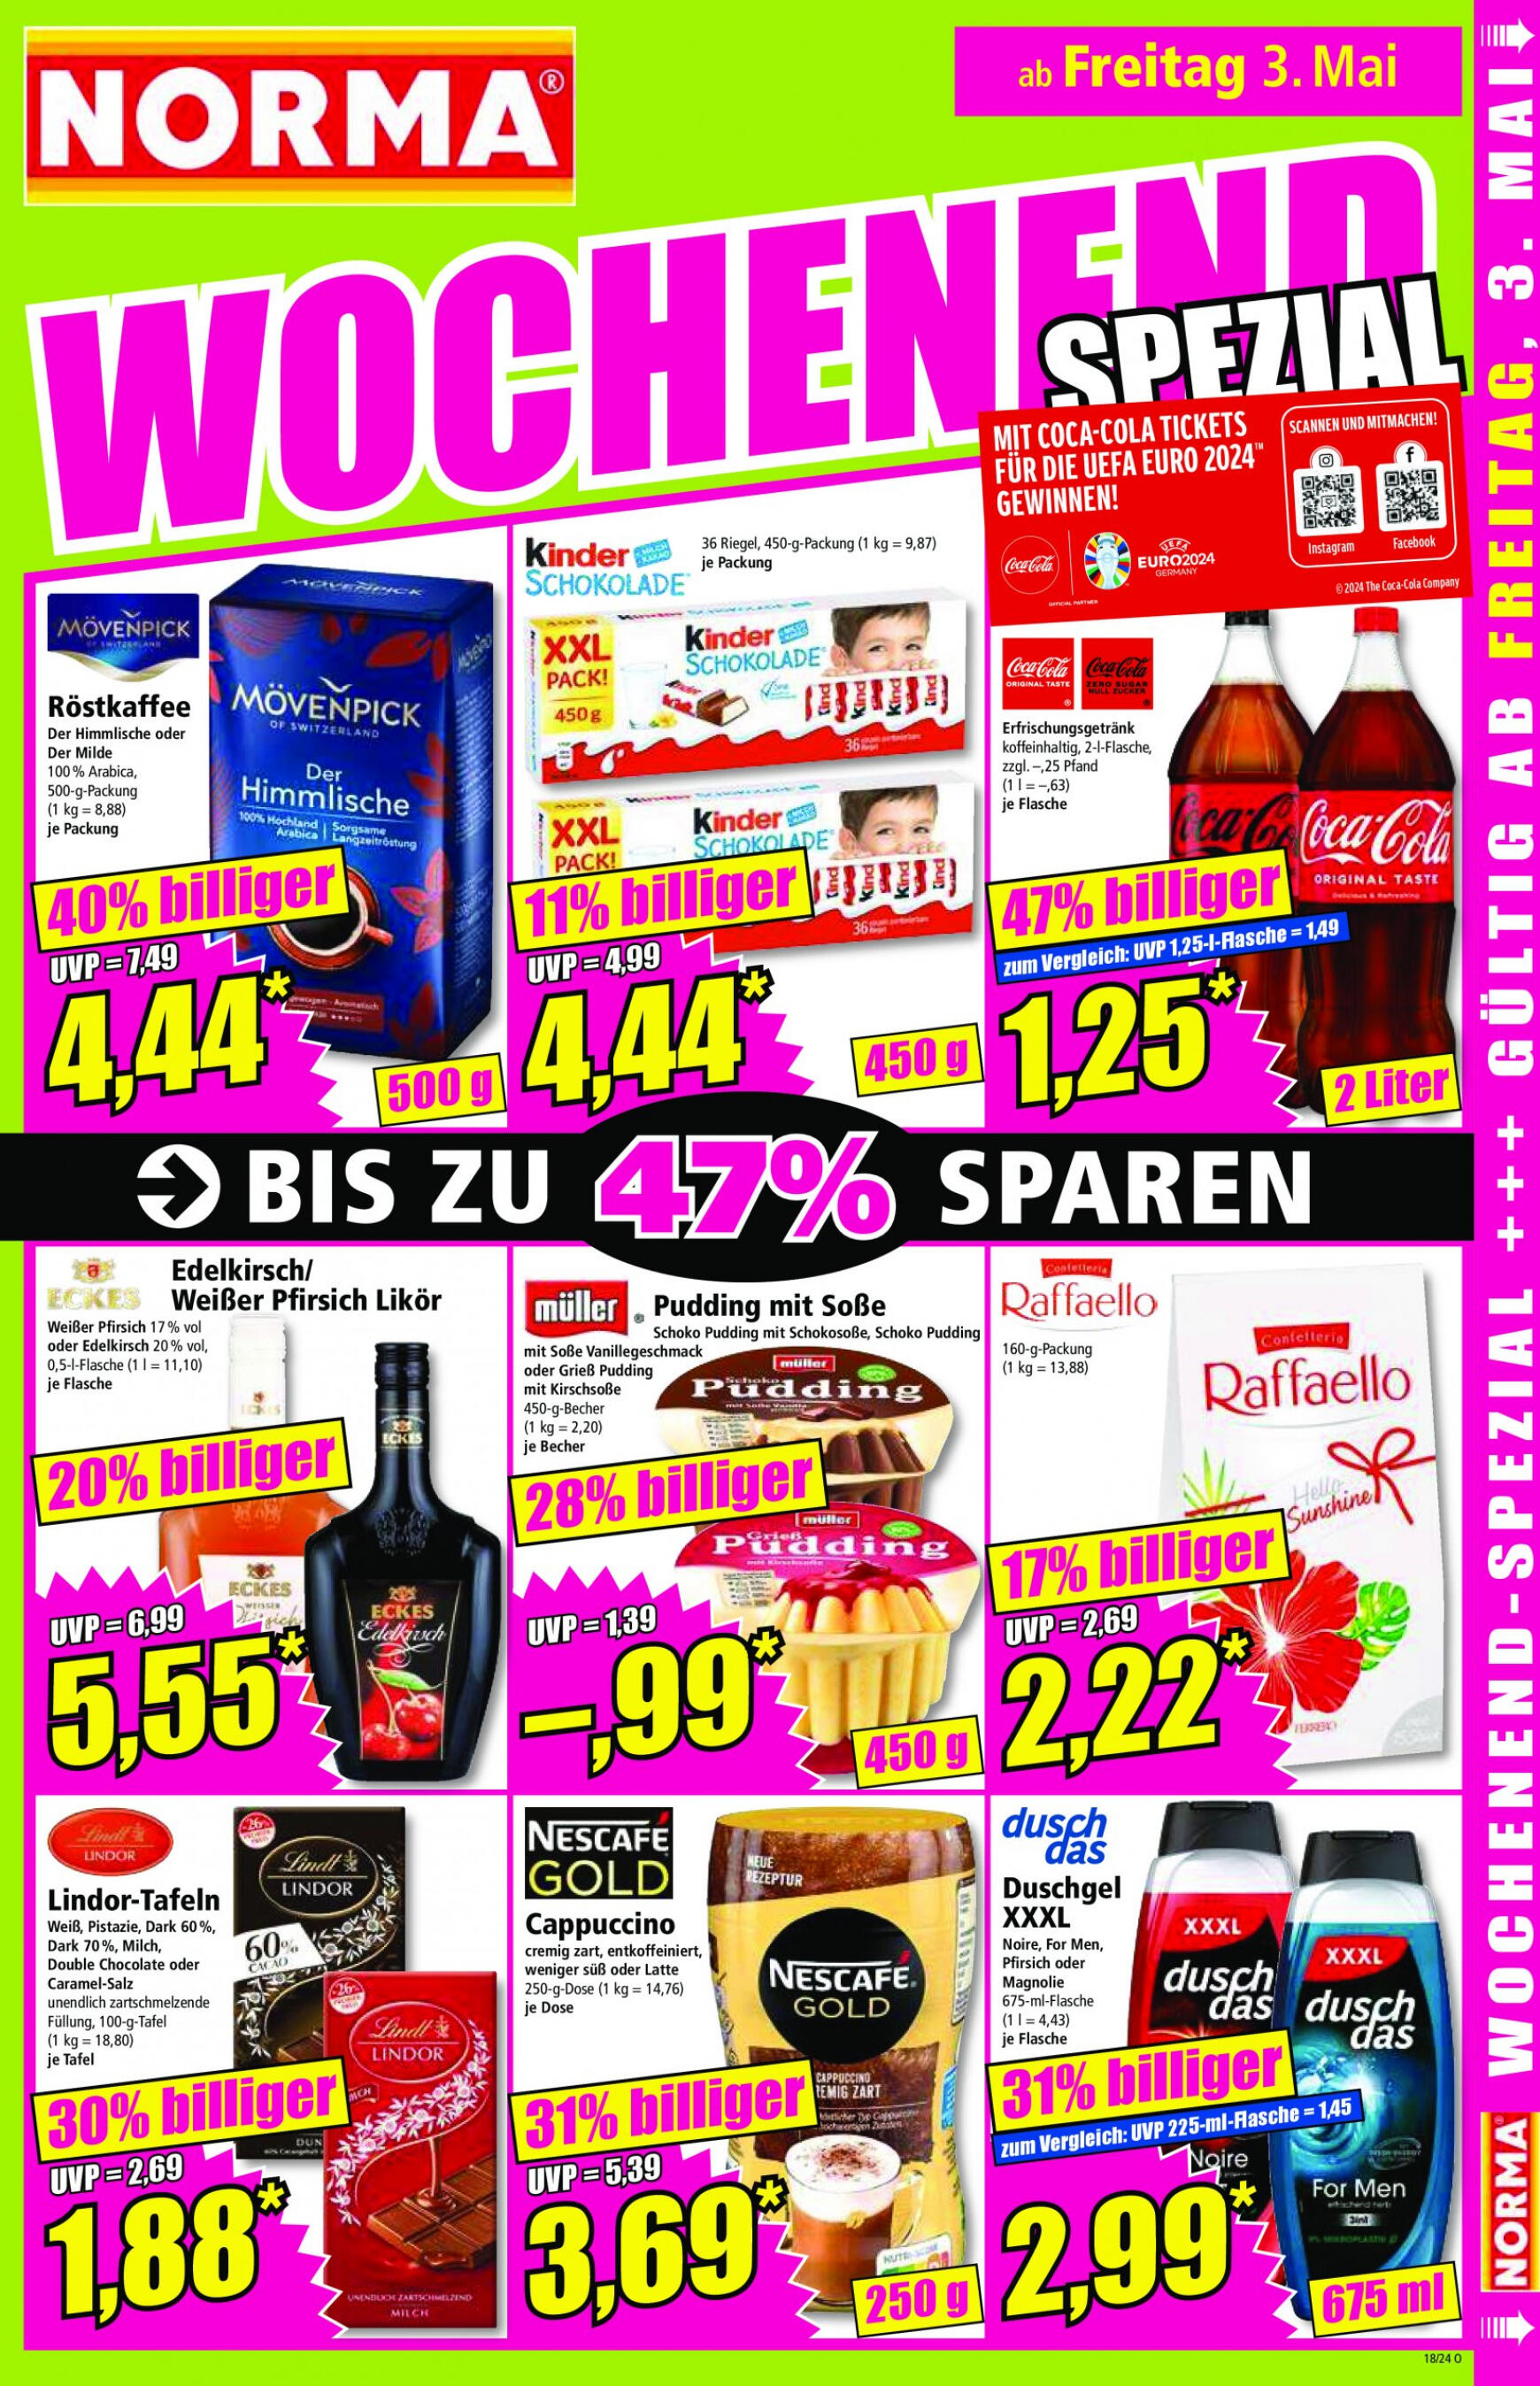 norma - Flyer Norma aktuell 29.04. - 04.05. - page: 15